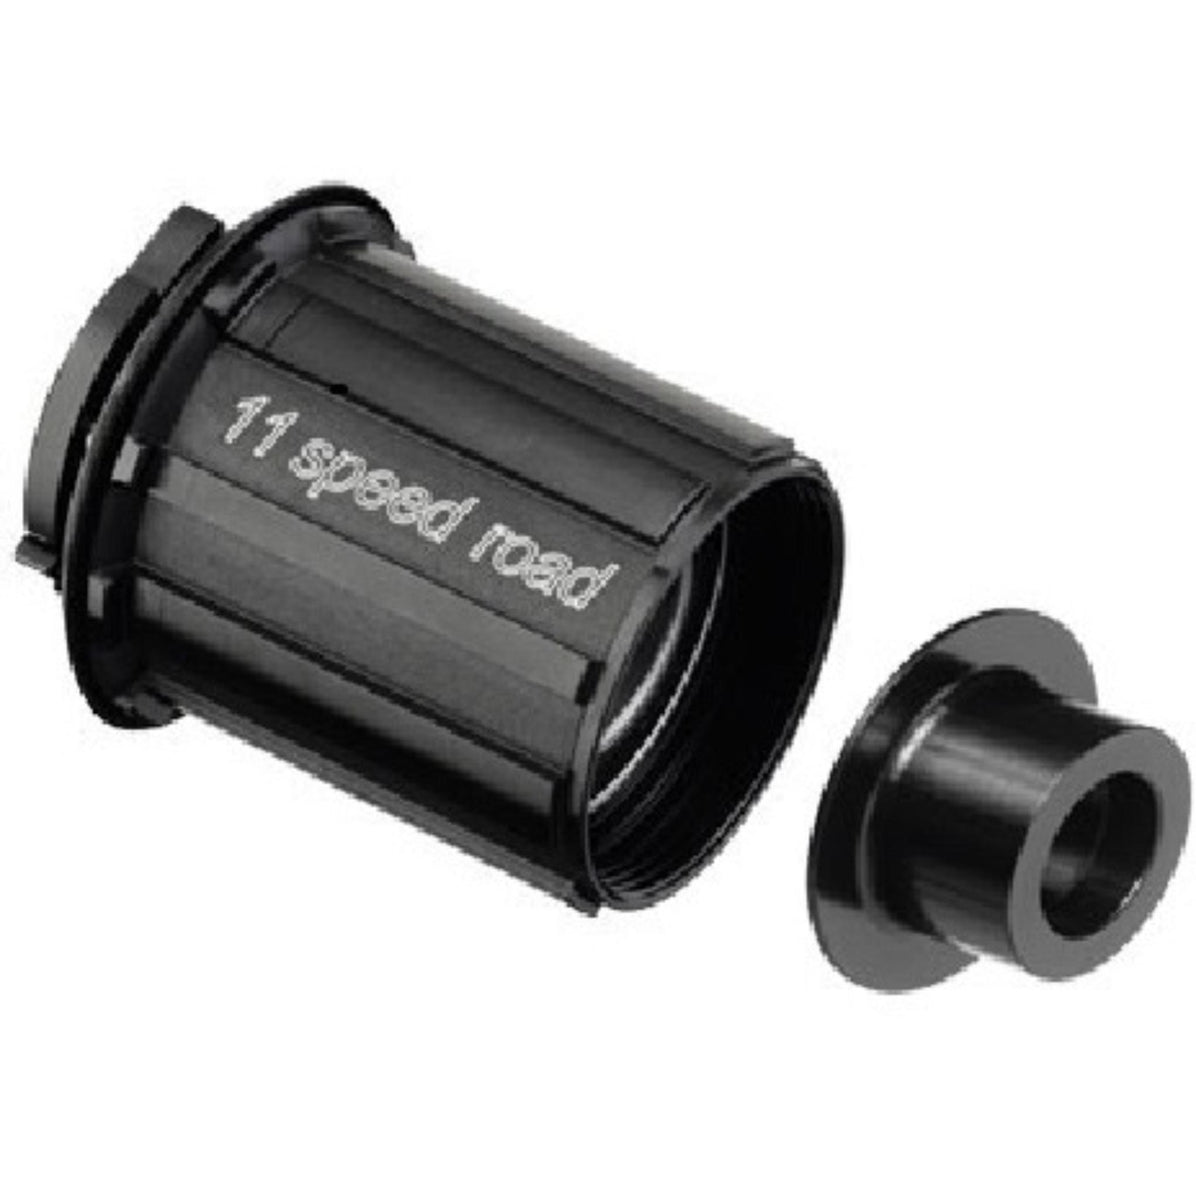 DT Swiss Pawl Freehub Conversion Kit for Shimano 11-Speed Road 142/12mm